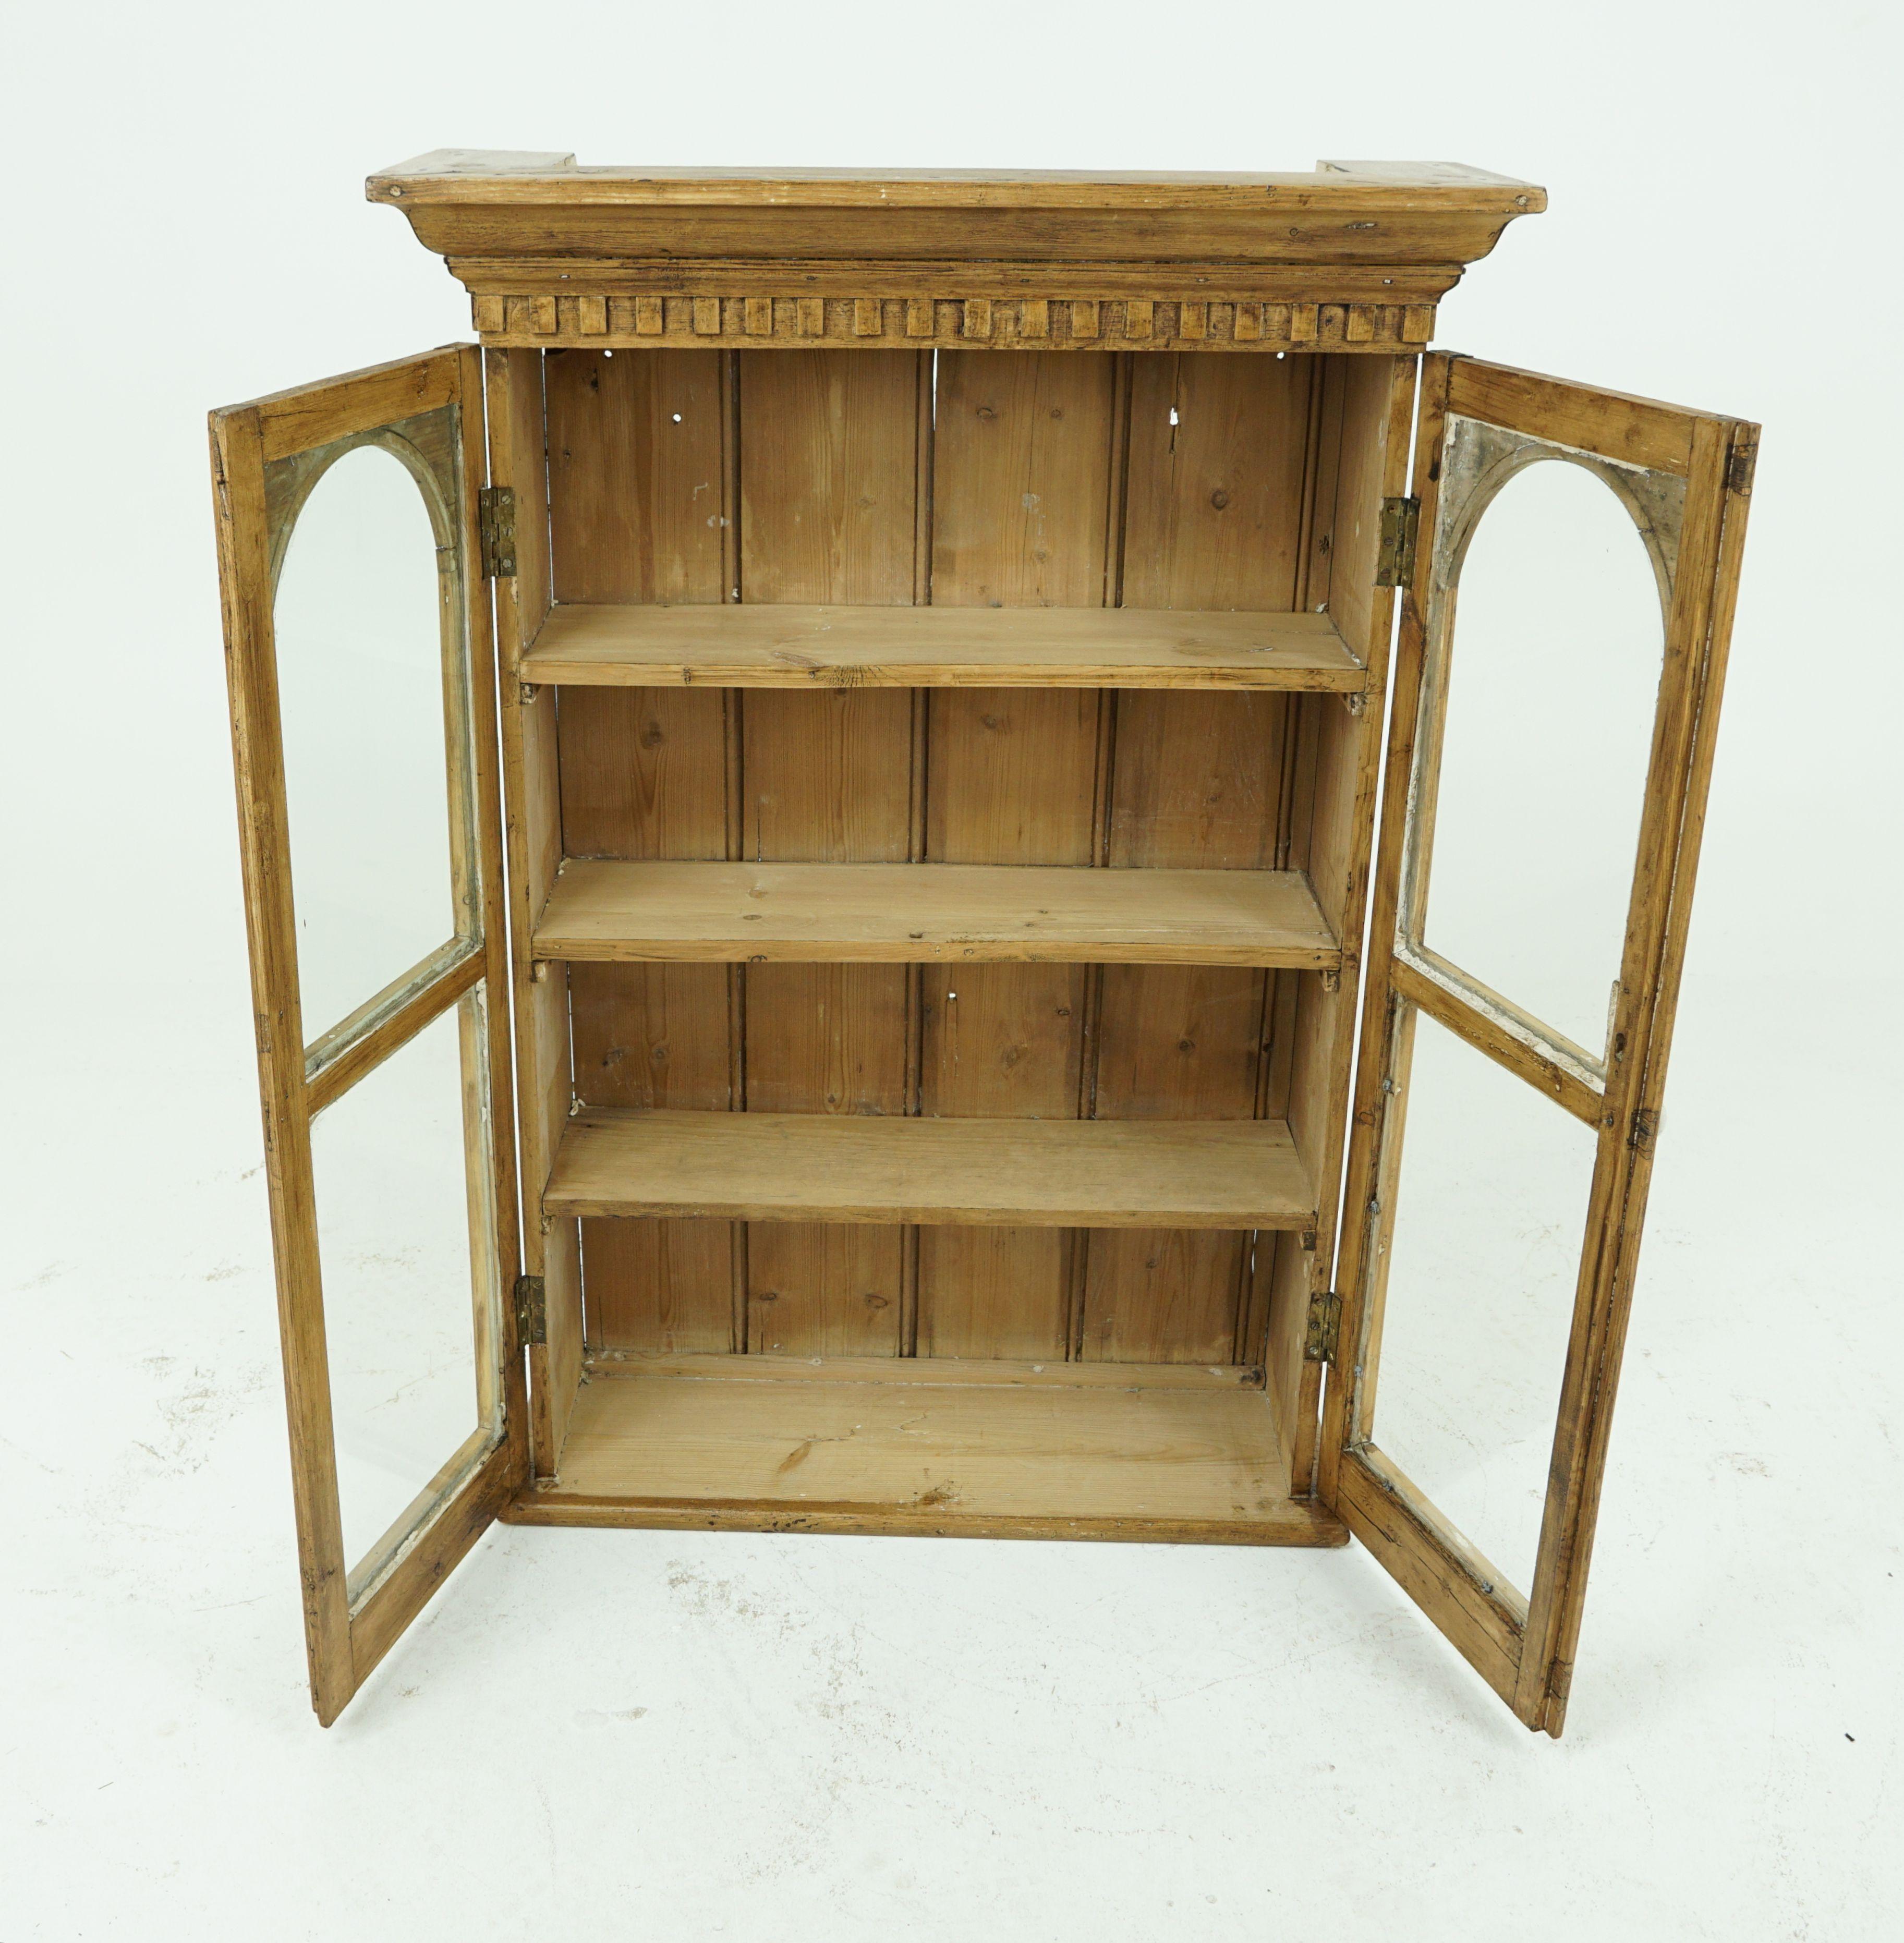 Antique hanging cabinet, Victorian pine 2-door glass fronted cabinet, antique furniture, Scotland 1880, B1786

Scotland 1880
Solid pine construction
Recently been stripped and waxed
Overhang cornice above
Dentil frieze below
Pair of domed top